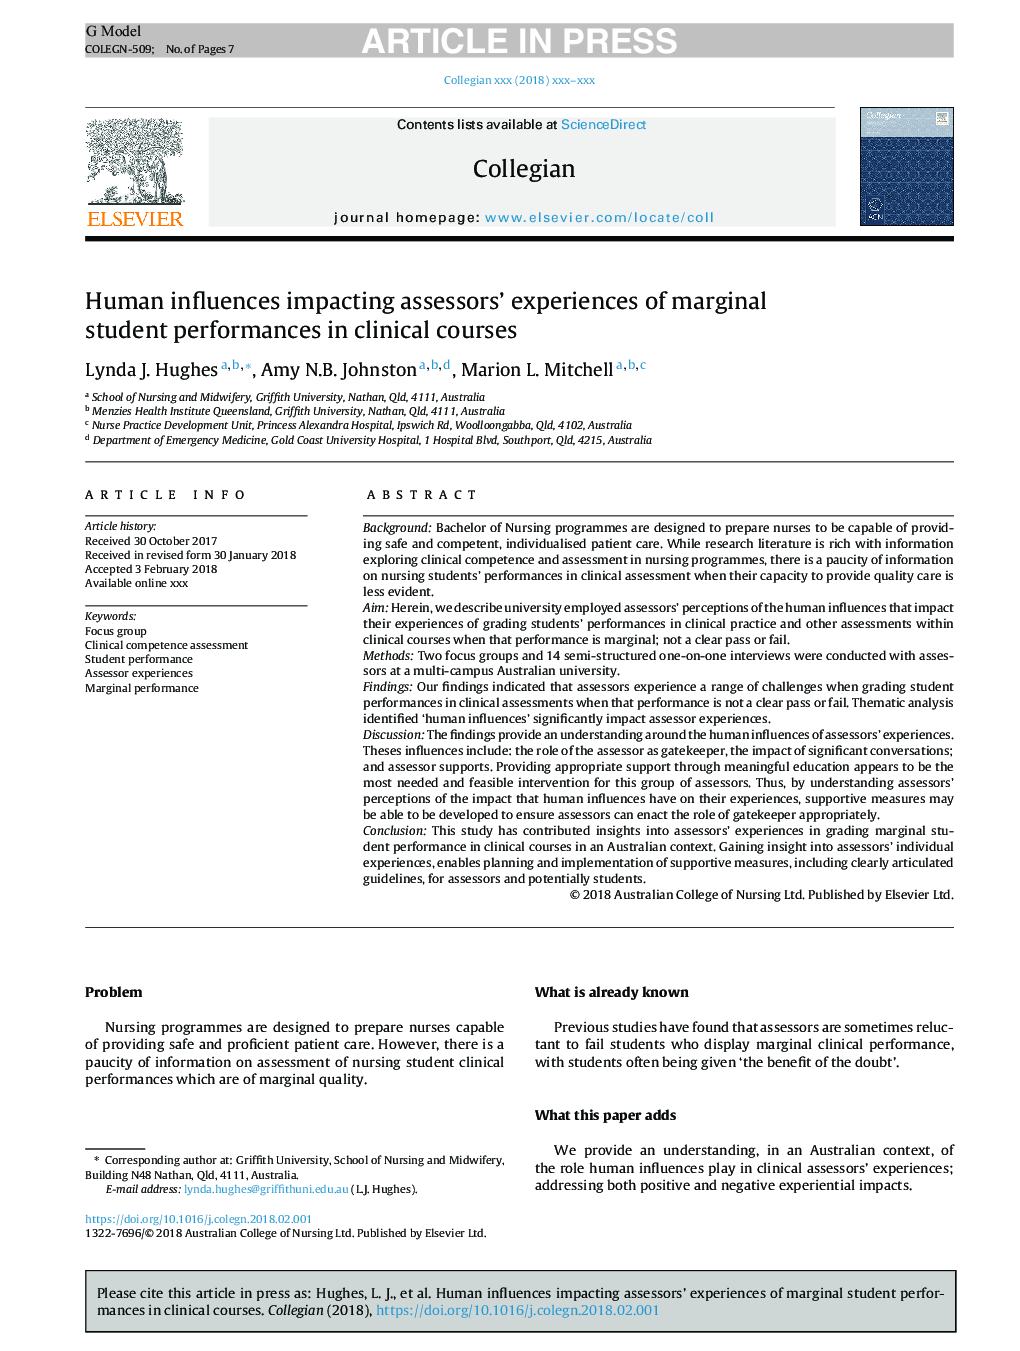 Human influences impacting assessors' experiences of marginal student performances in clinical courses